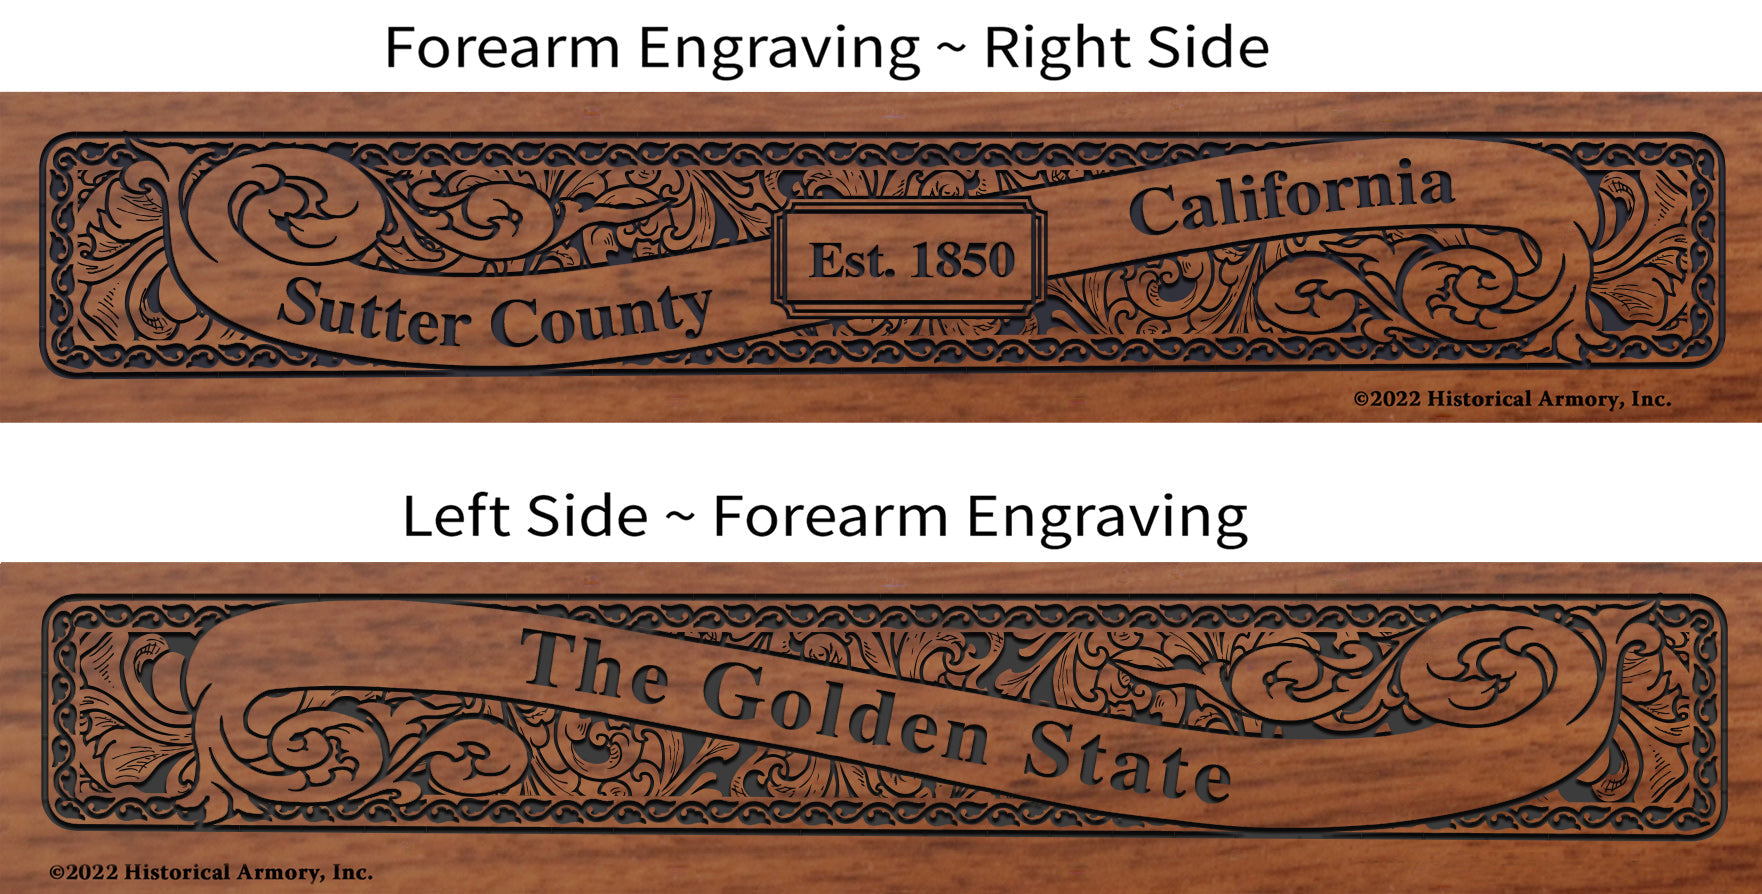 Sutter County California Engraved Rifle Forearm